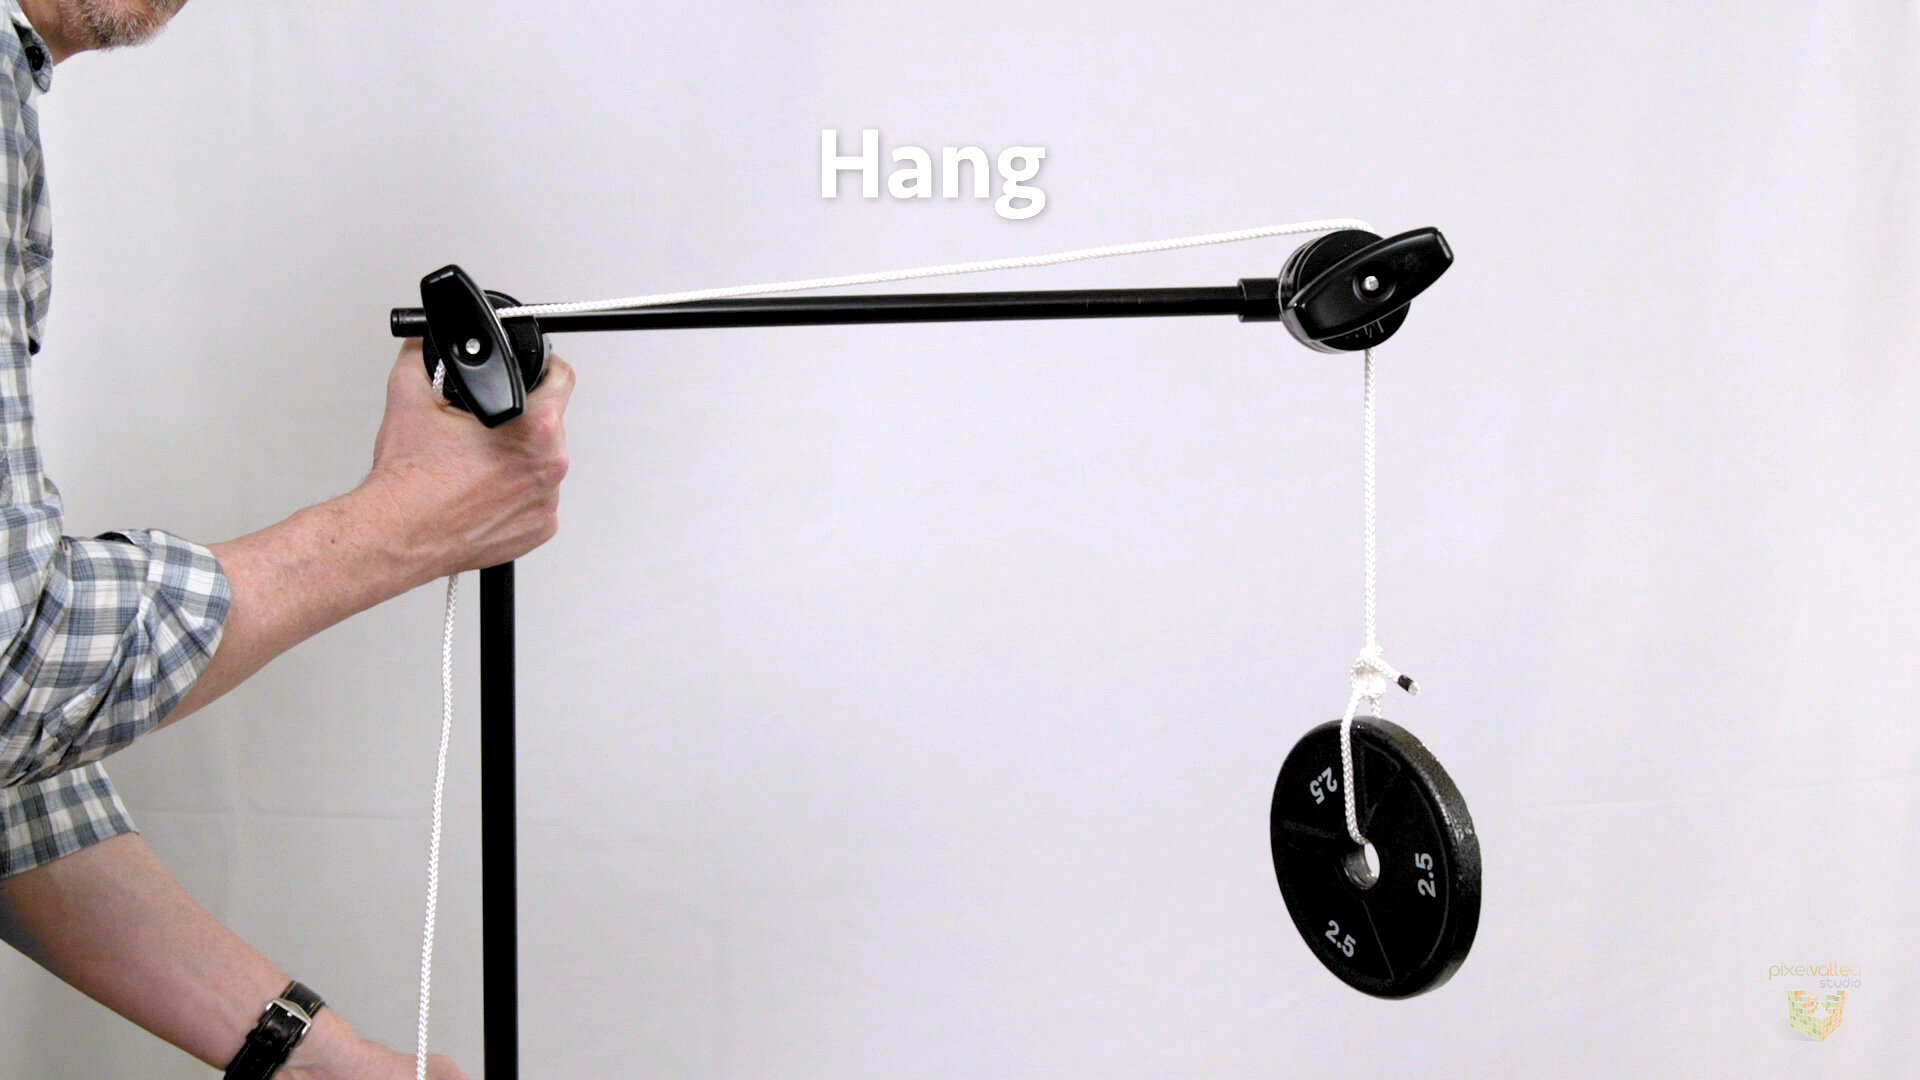 How You Can Turn a C-Stand Into a DIY  Studio